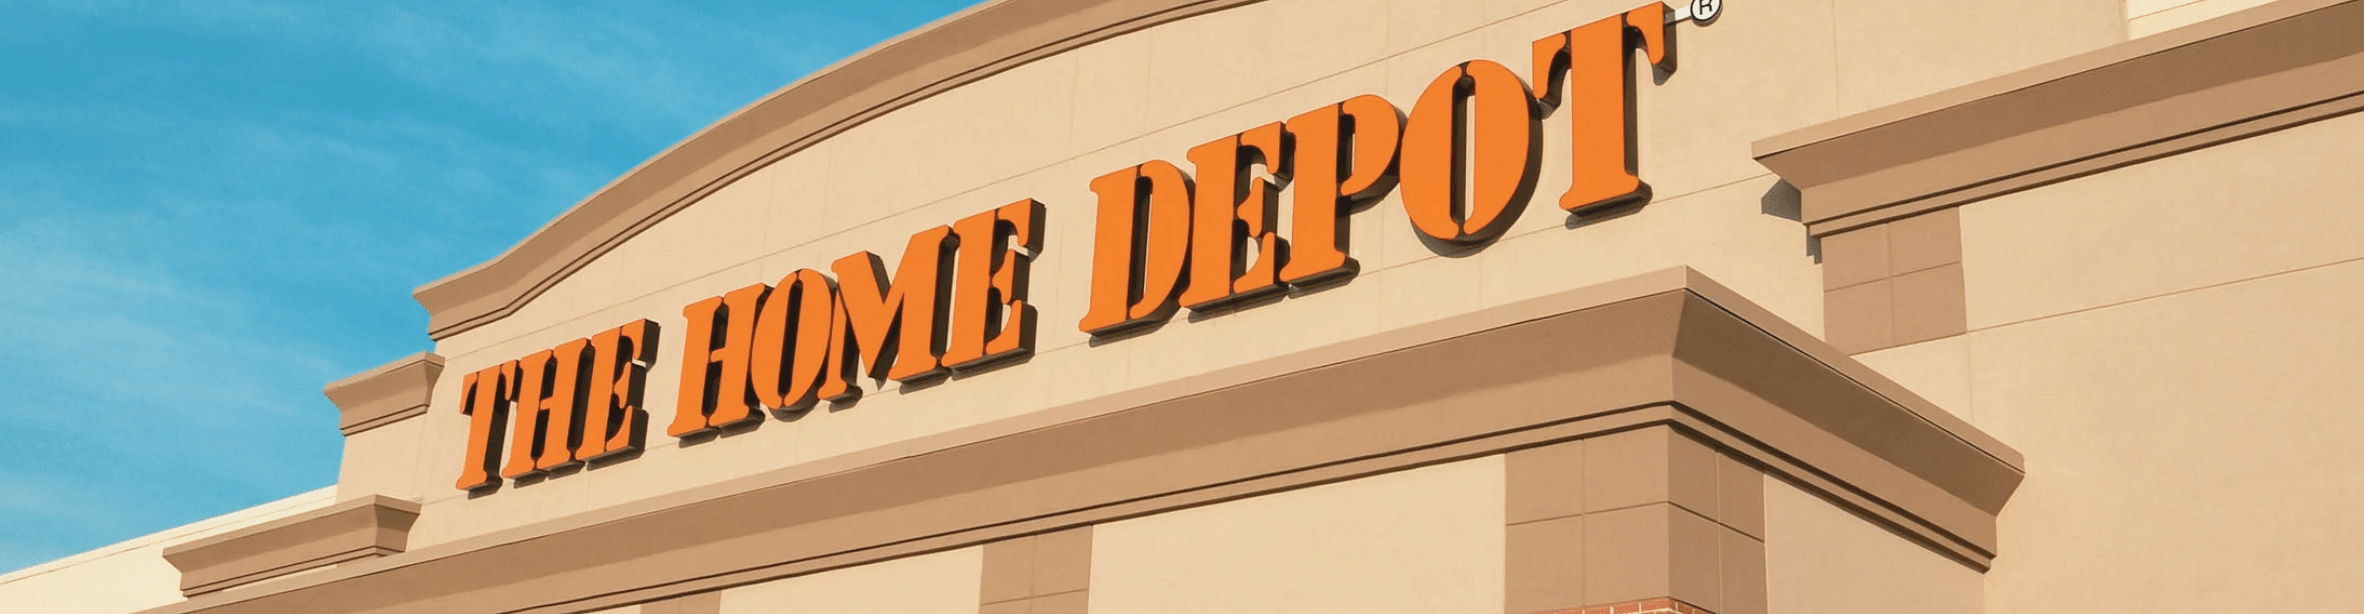 The Complete History Of The Home Depot Logo